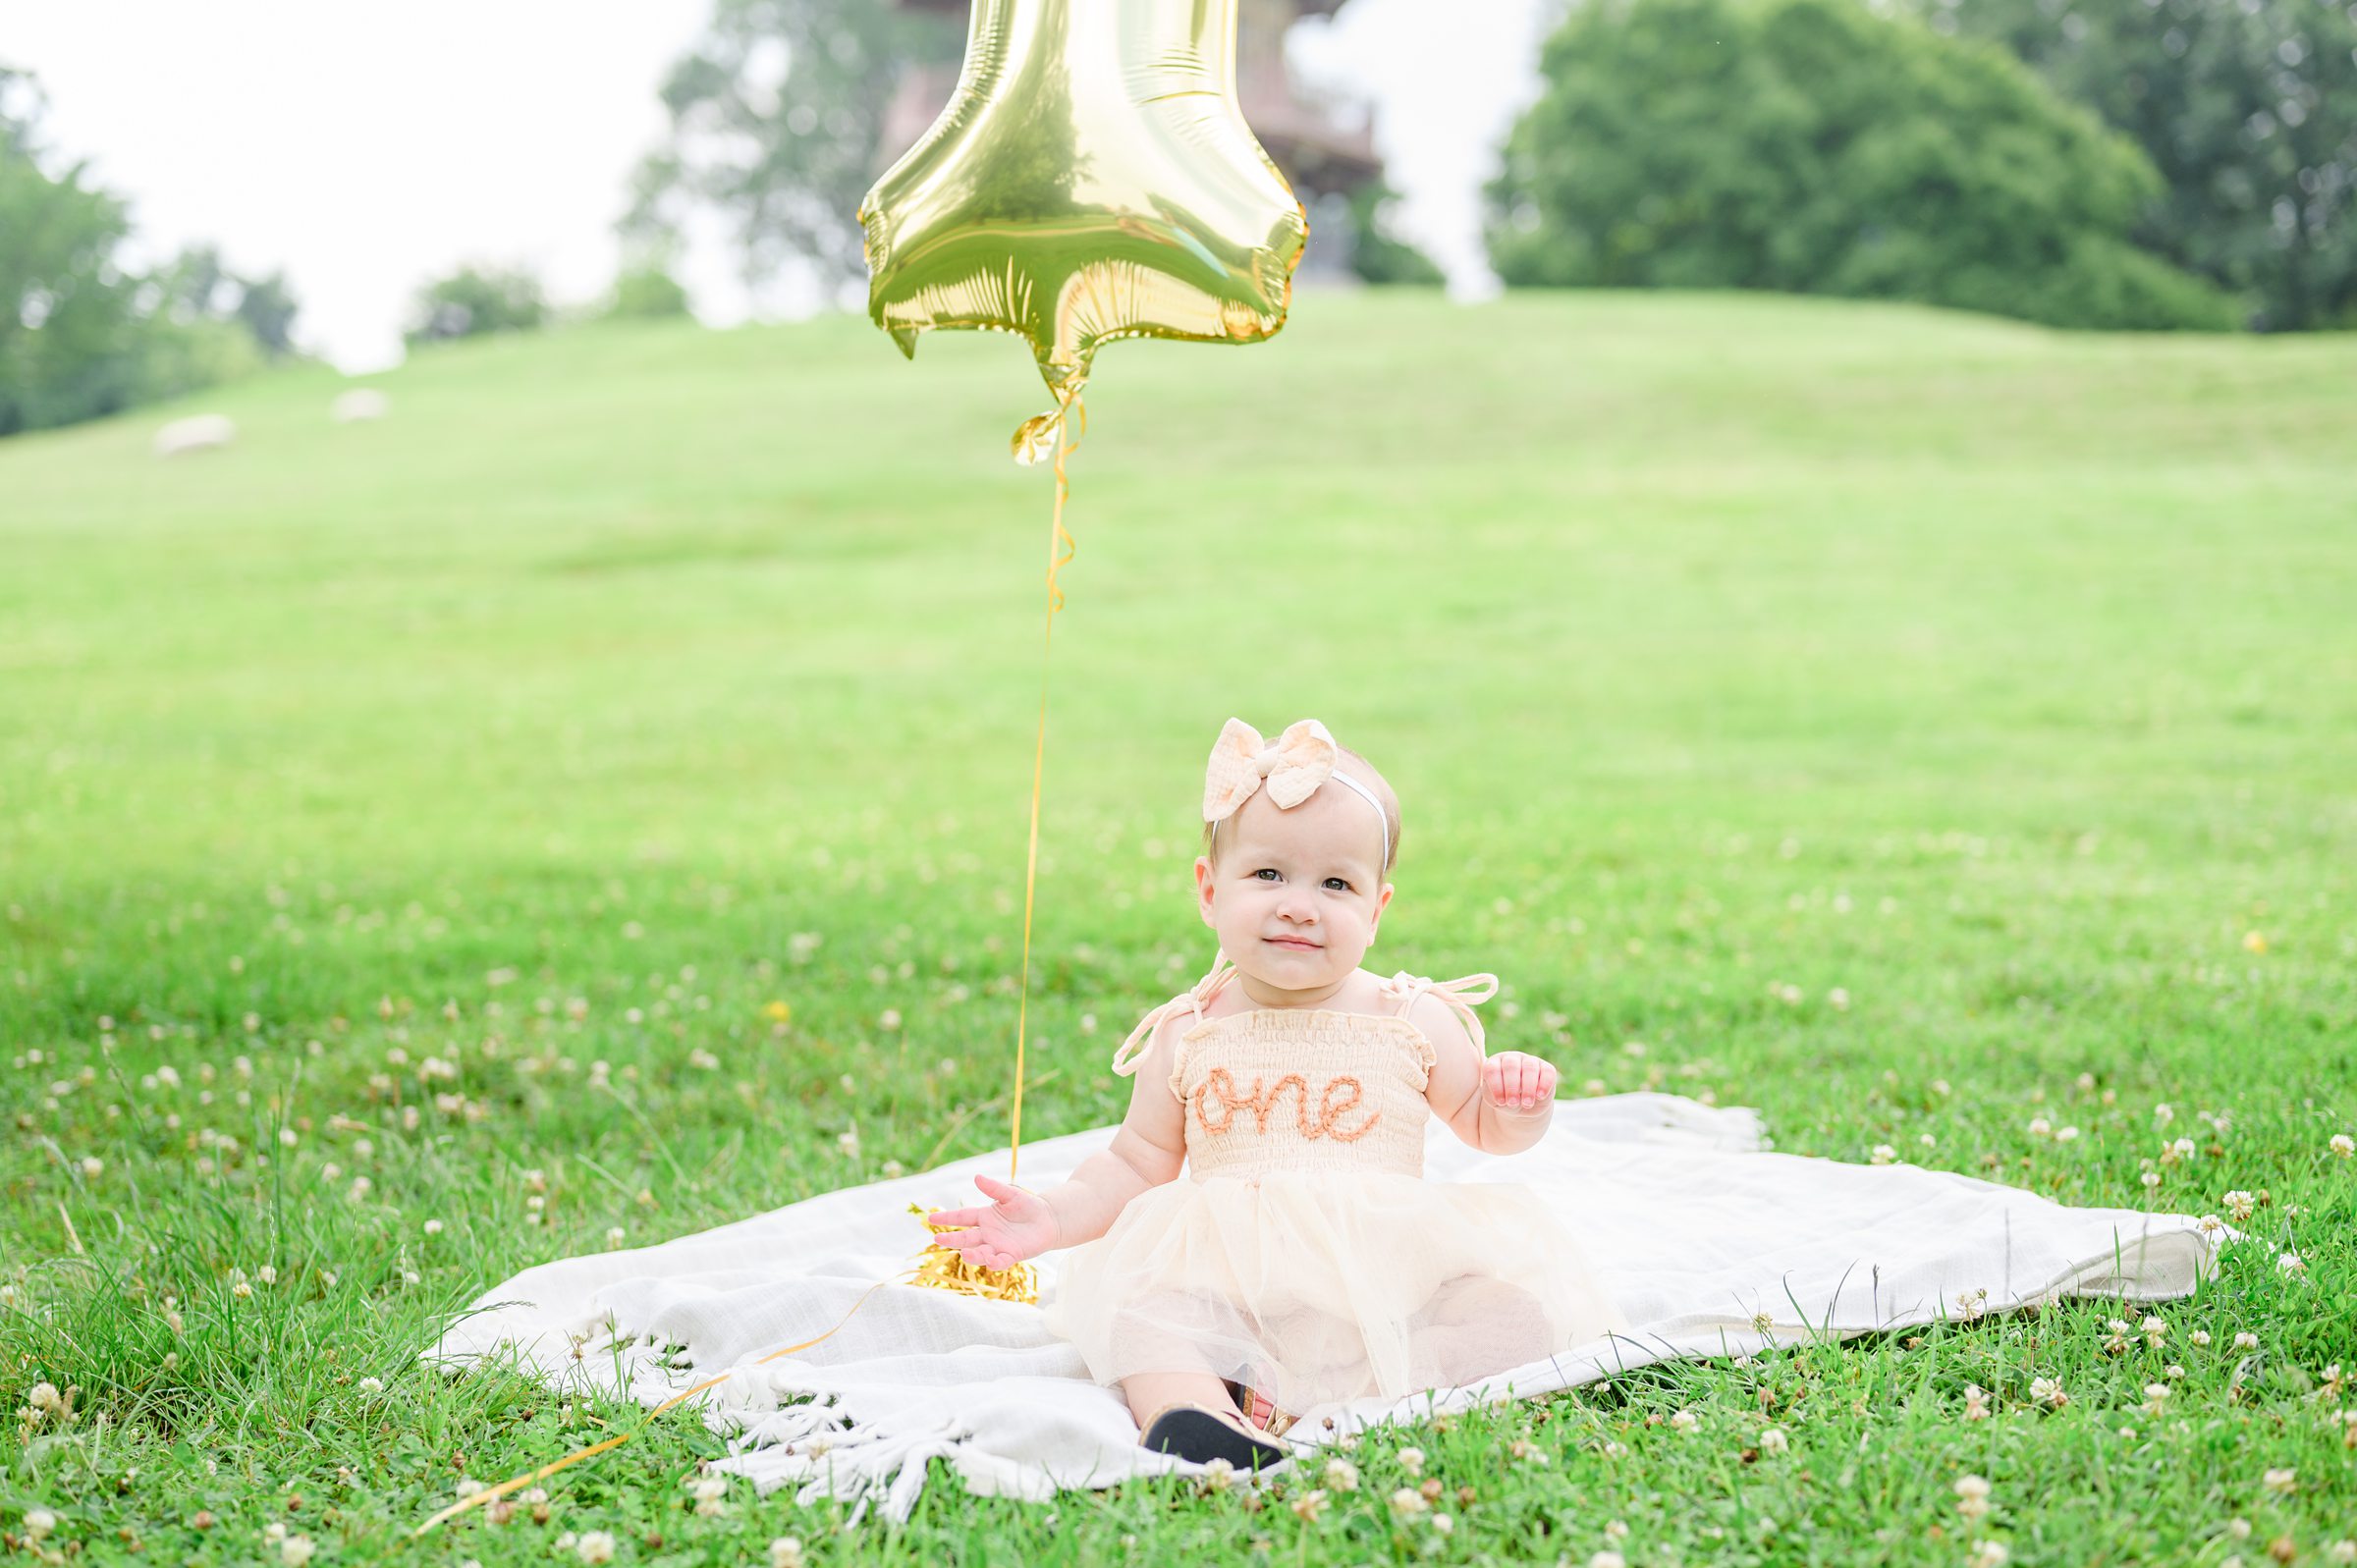 1st Birthday and Family Portrait Session at Patterson Park in Baltimore, Maryland. Photographed by Baltimore Family Milestone Photographer Cait Kramer.